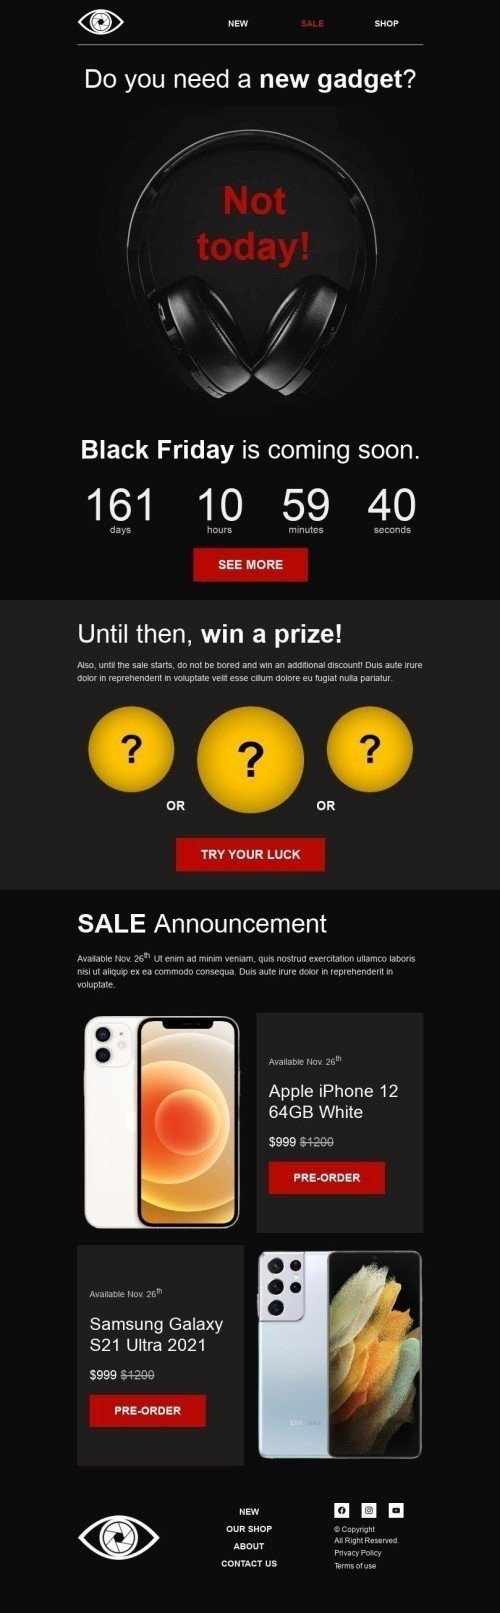 Black Friday Email Template "Win a prize" for Gadgets industry desktop view